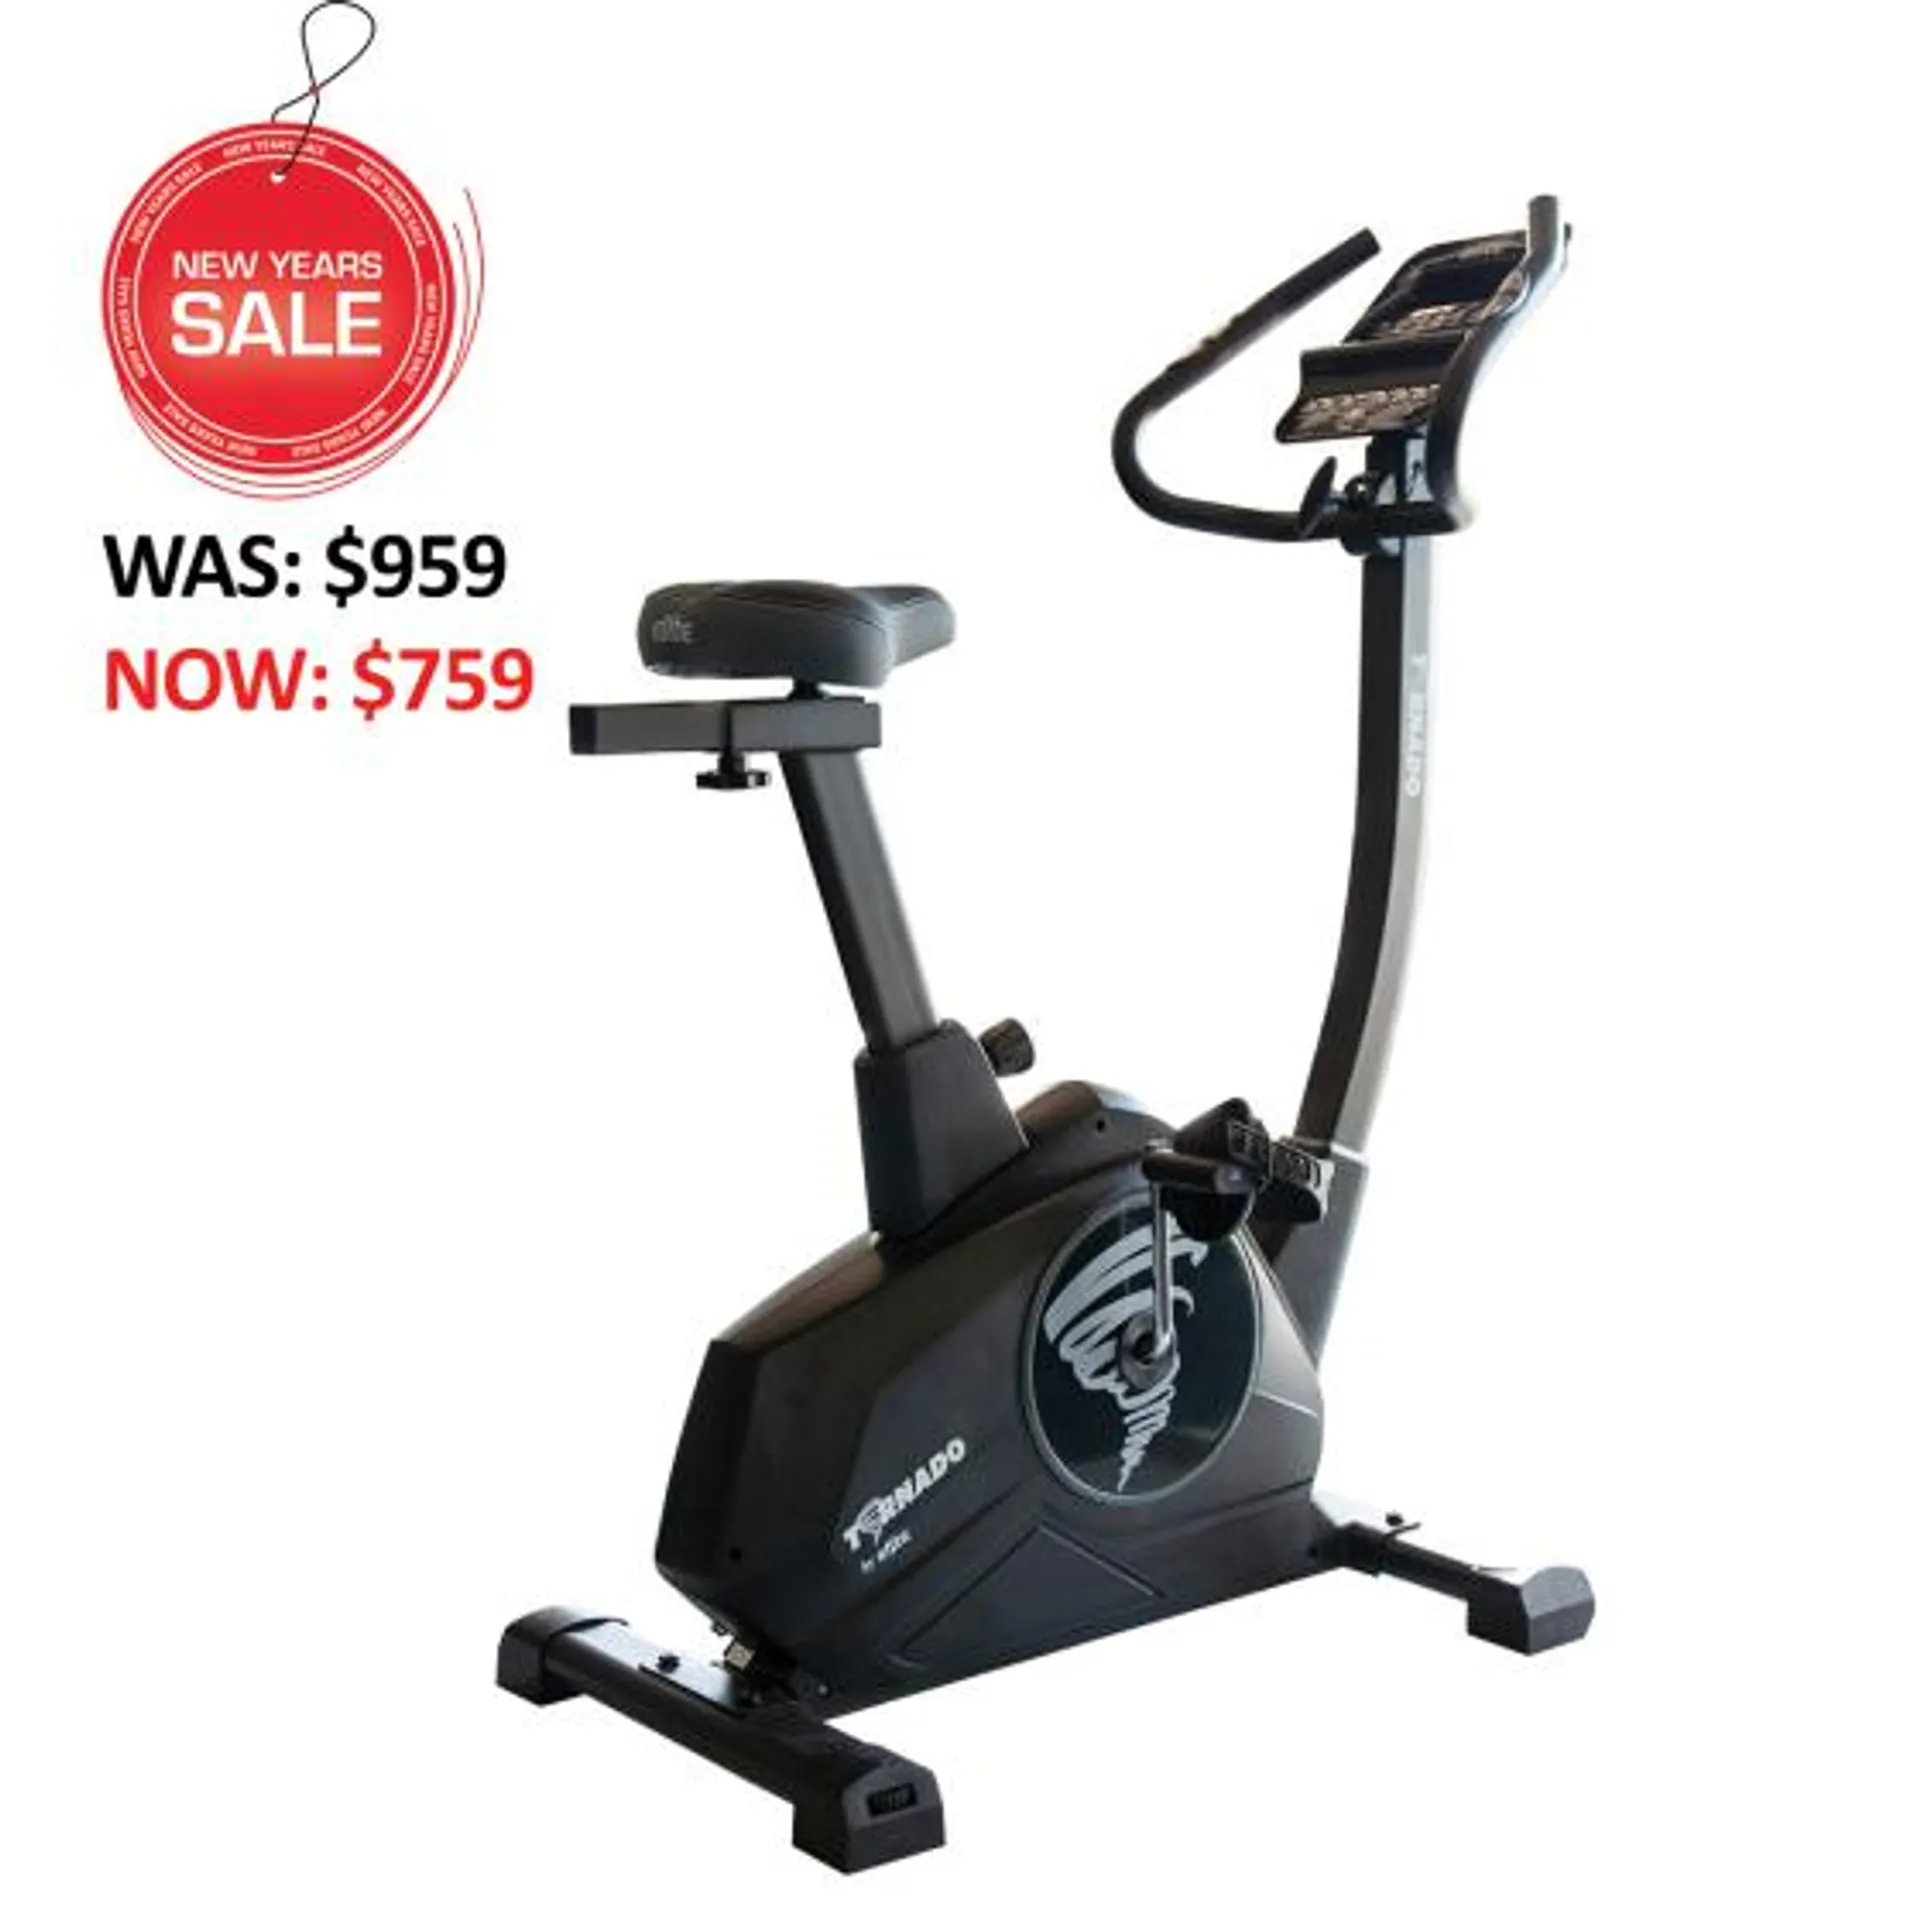 TORNADO EXERCYCLE CLEARANCE - AVAILABLE IN QUEENSTOWN